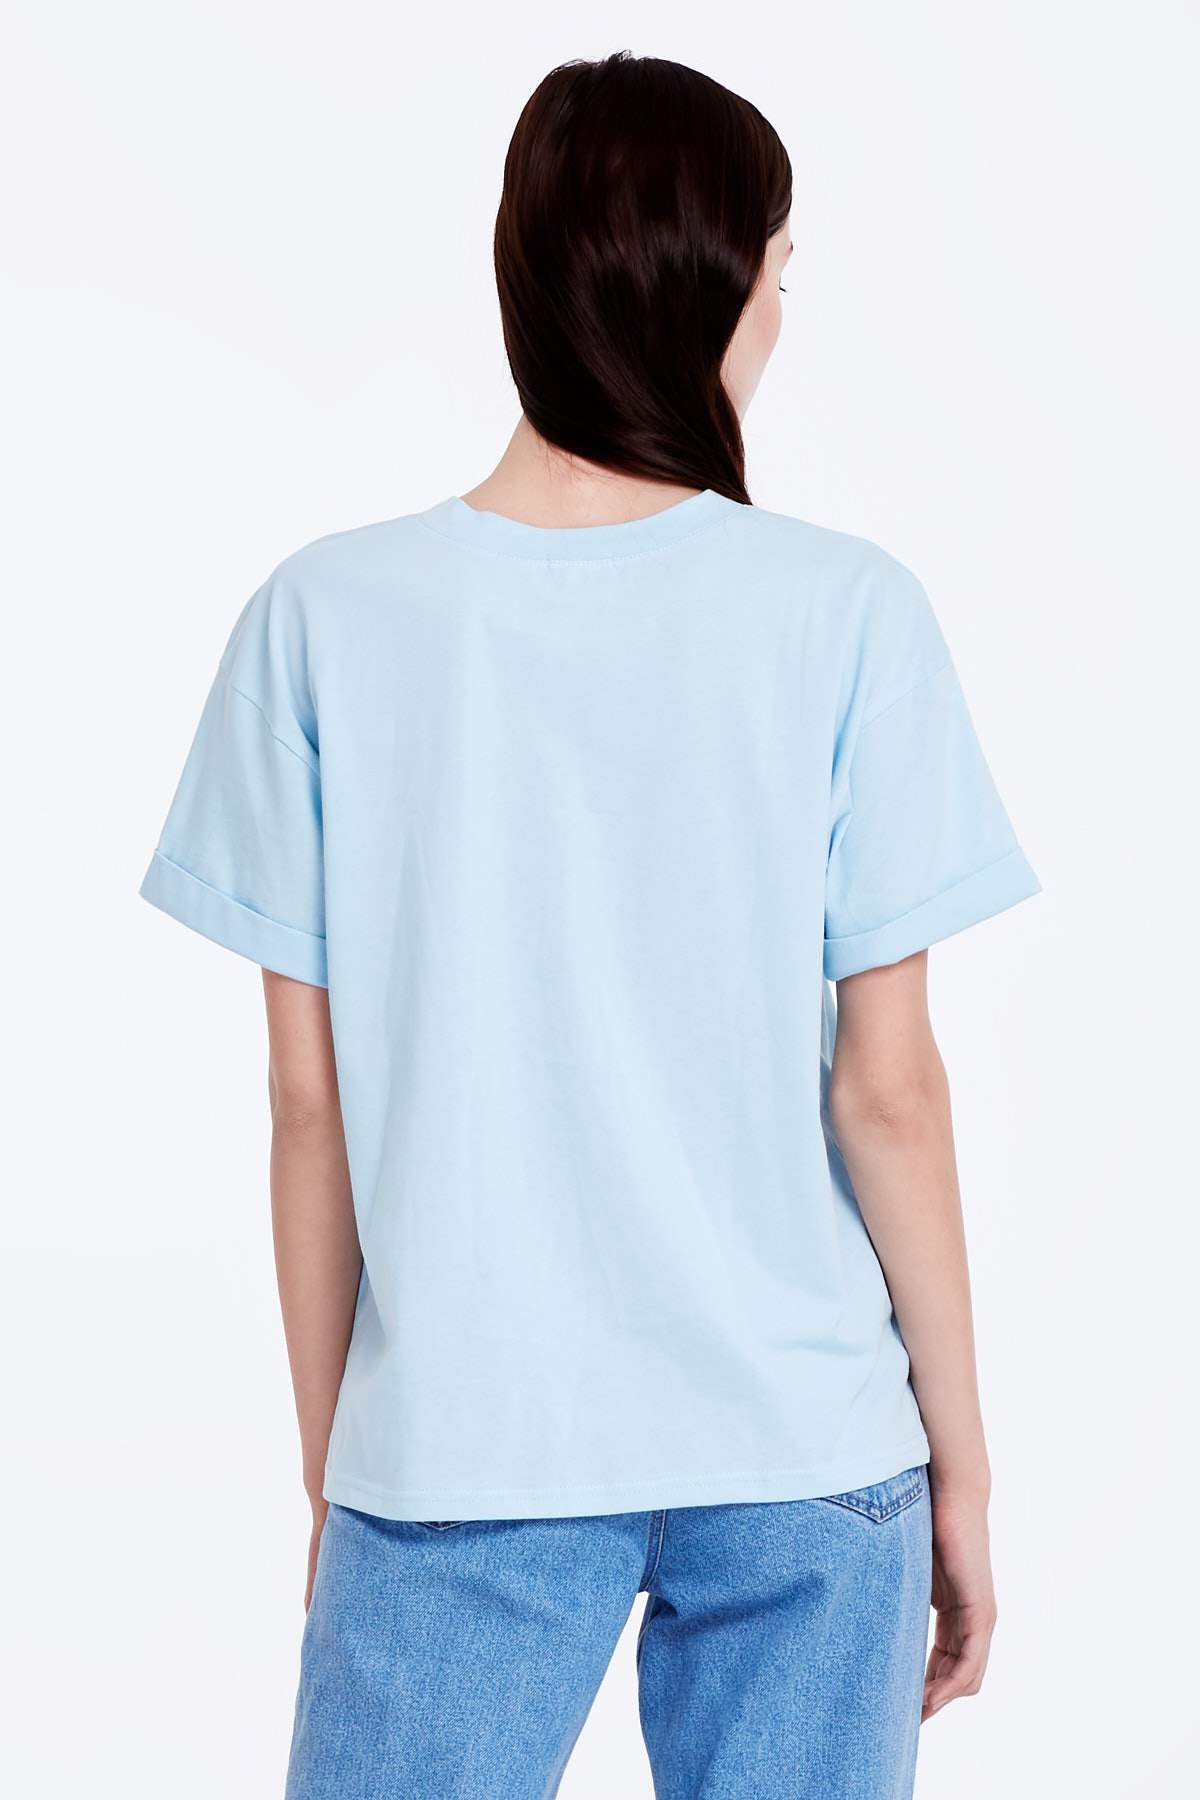 Loose-fitting blue T-shirt with cuffs, photo 5